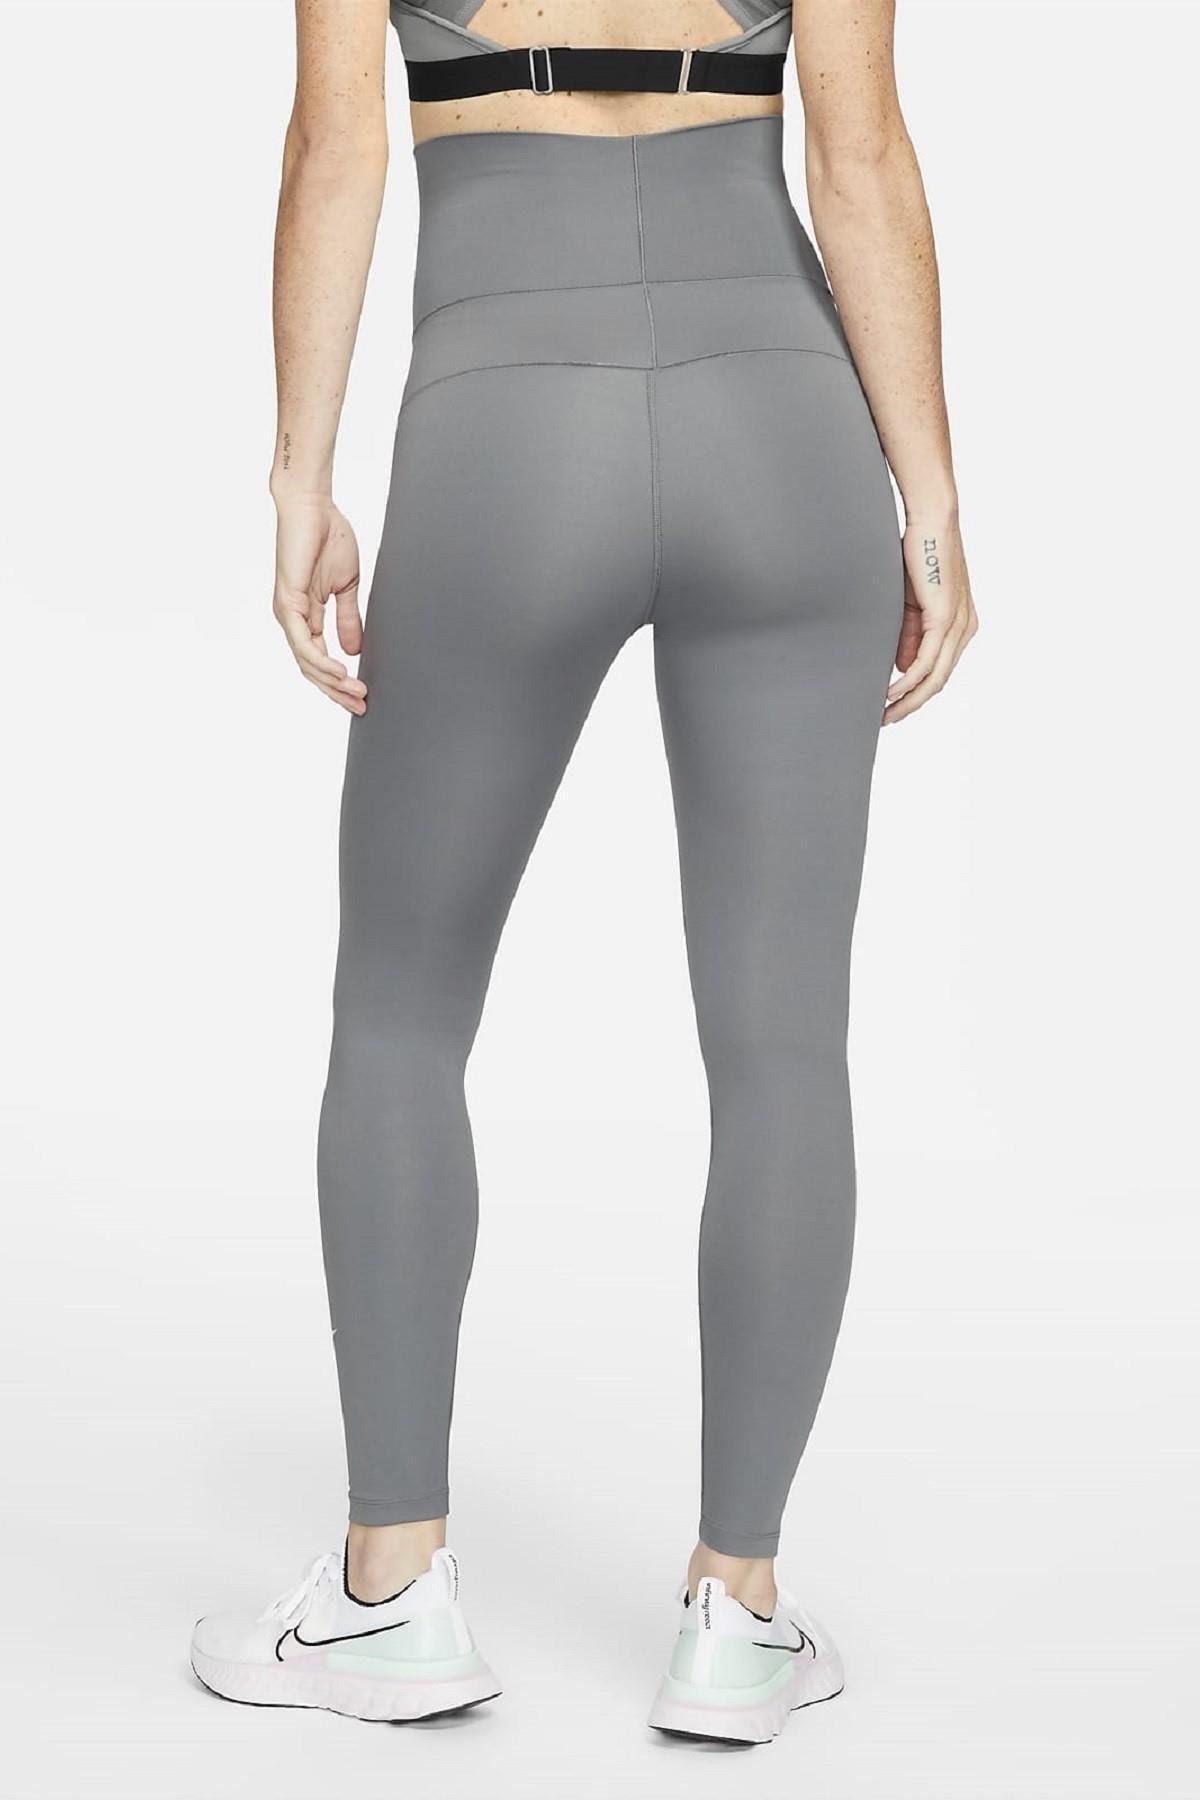 Best Maternity Workout Clothes - Nike One Women's High-Waisted